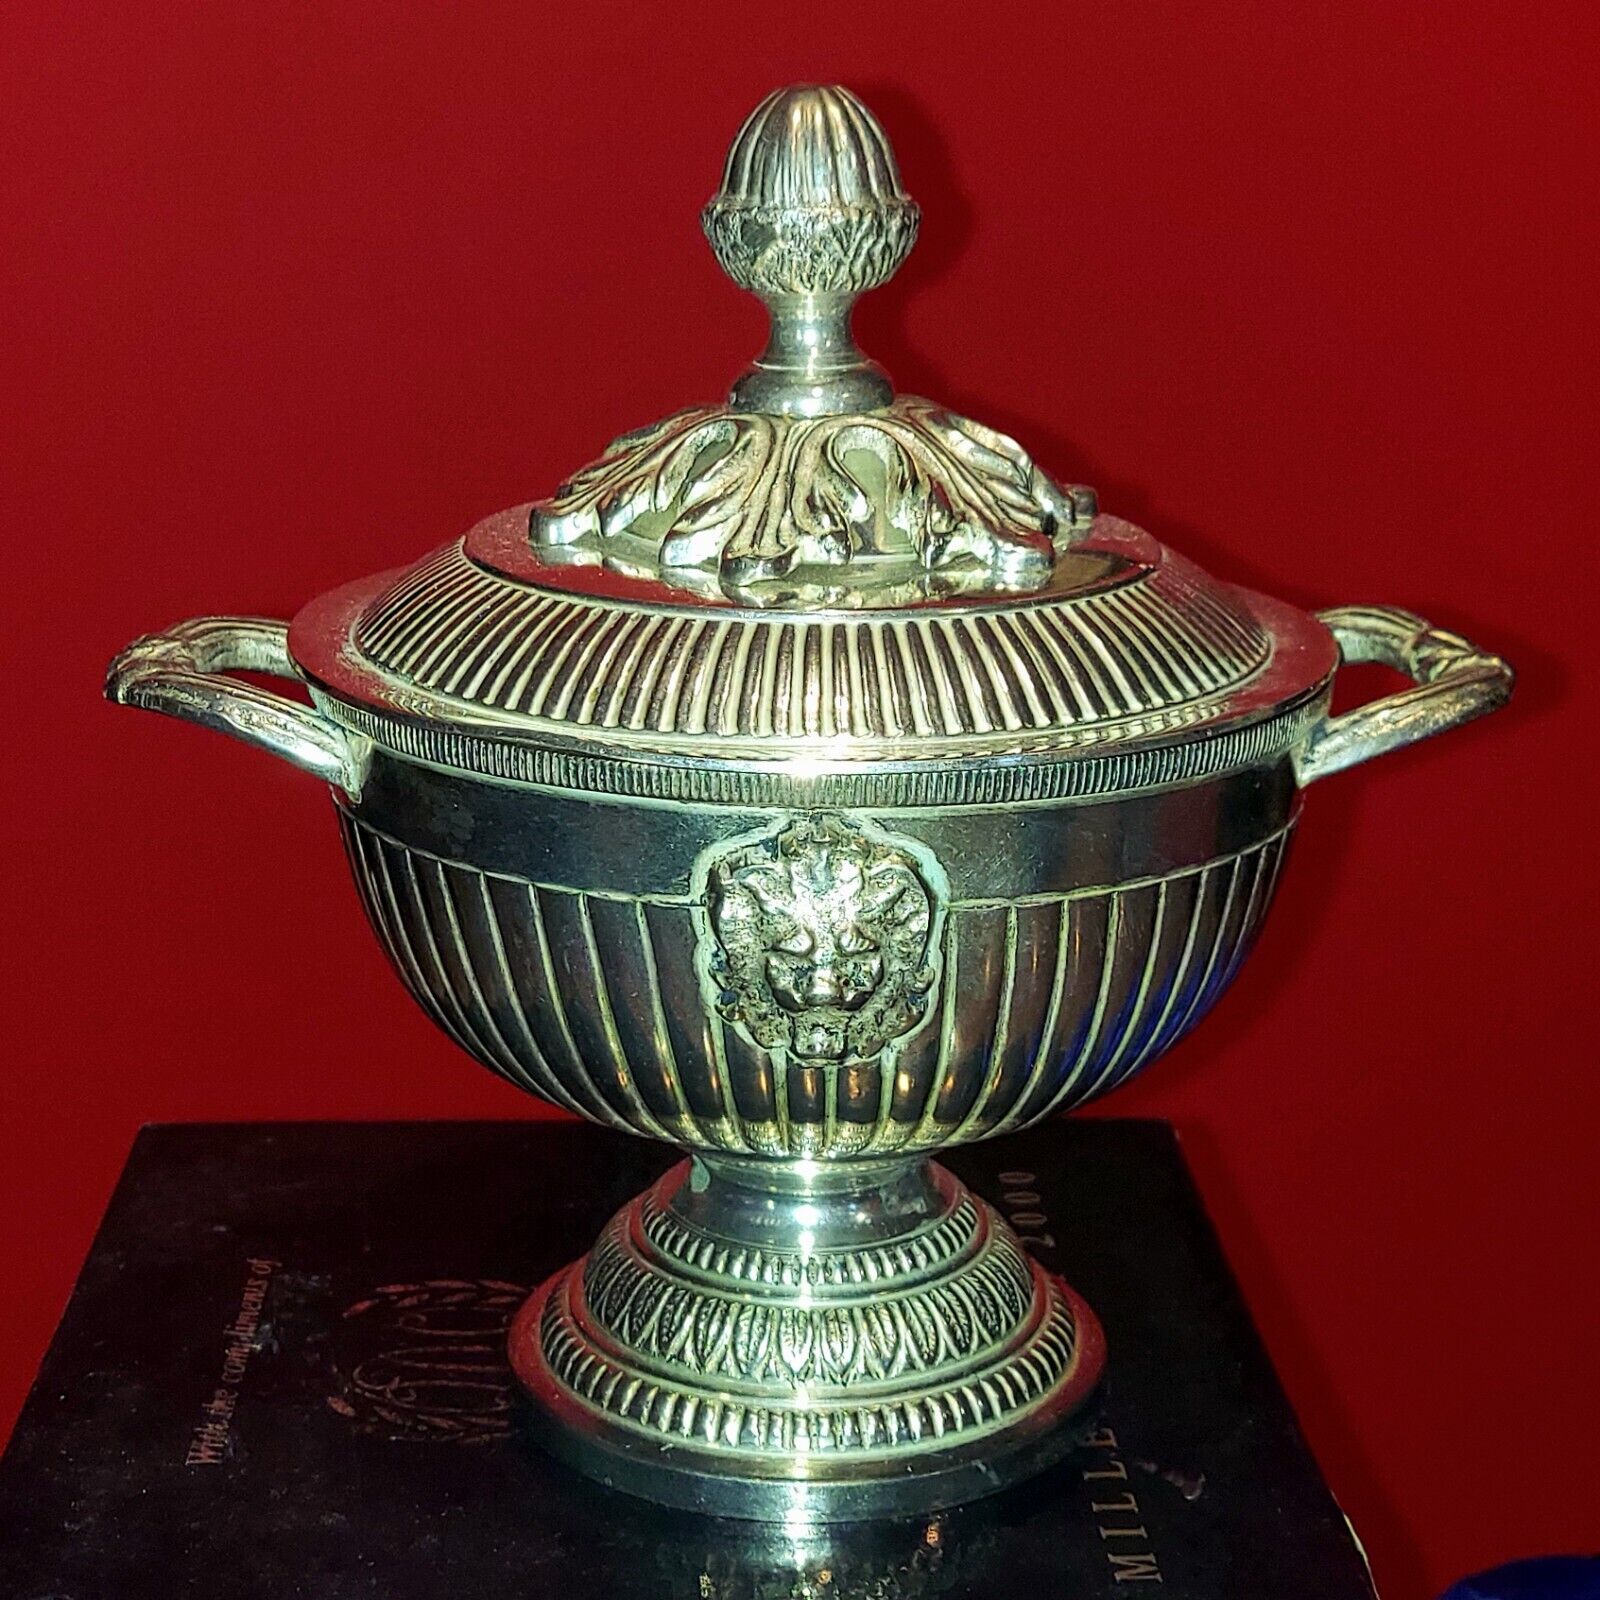 The Howard Hotel, Temple Place, Strand, London Covered Footed 2 Handled Bowl